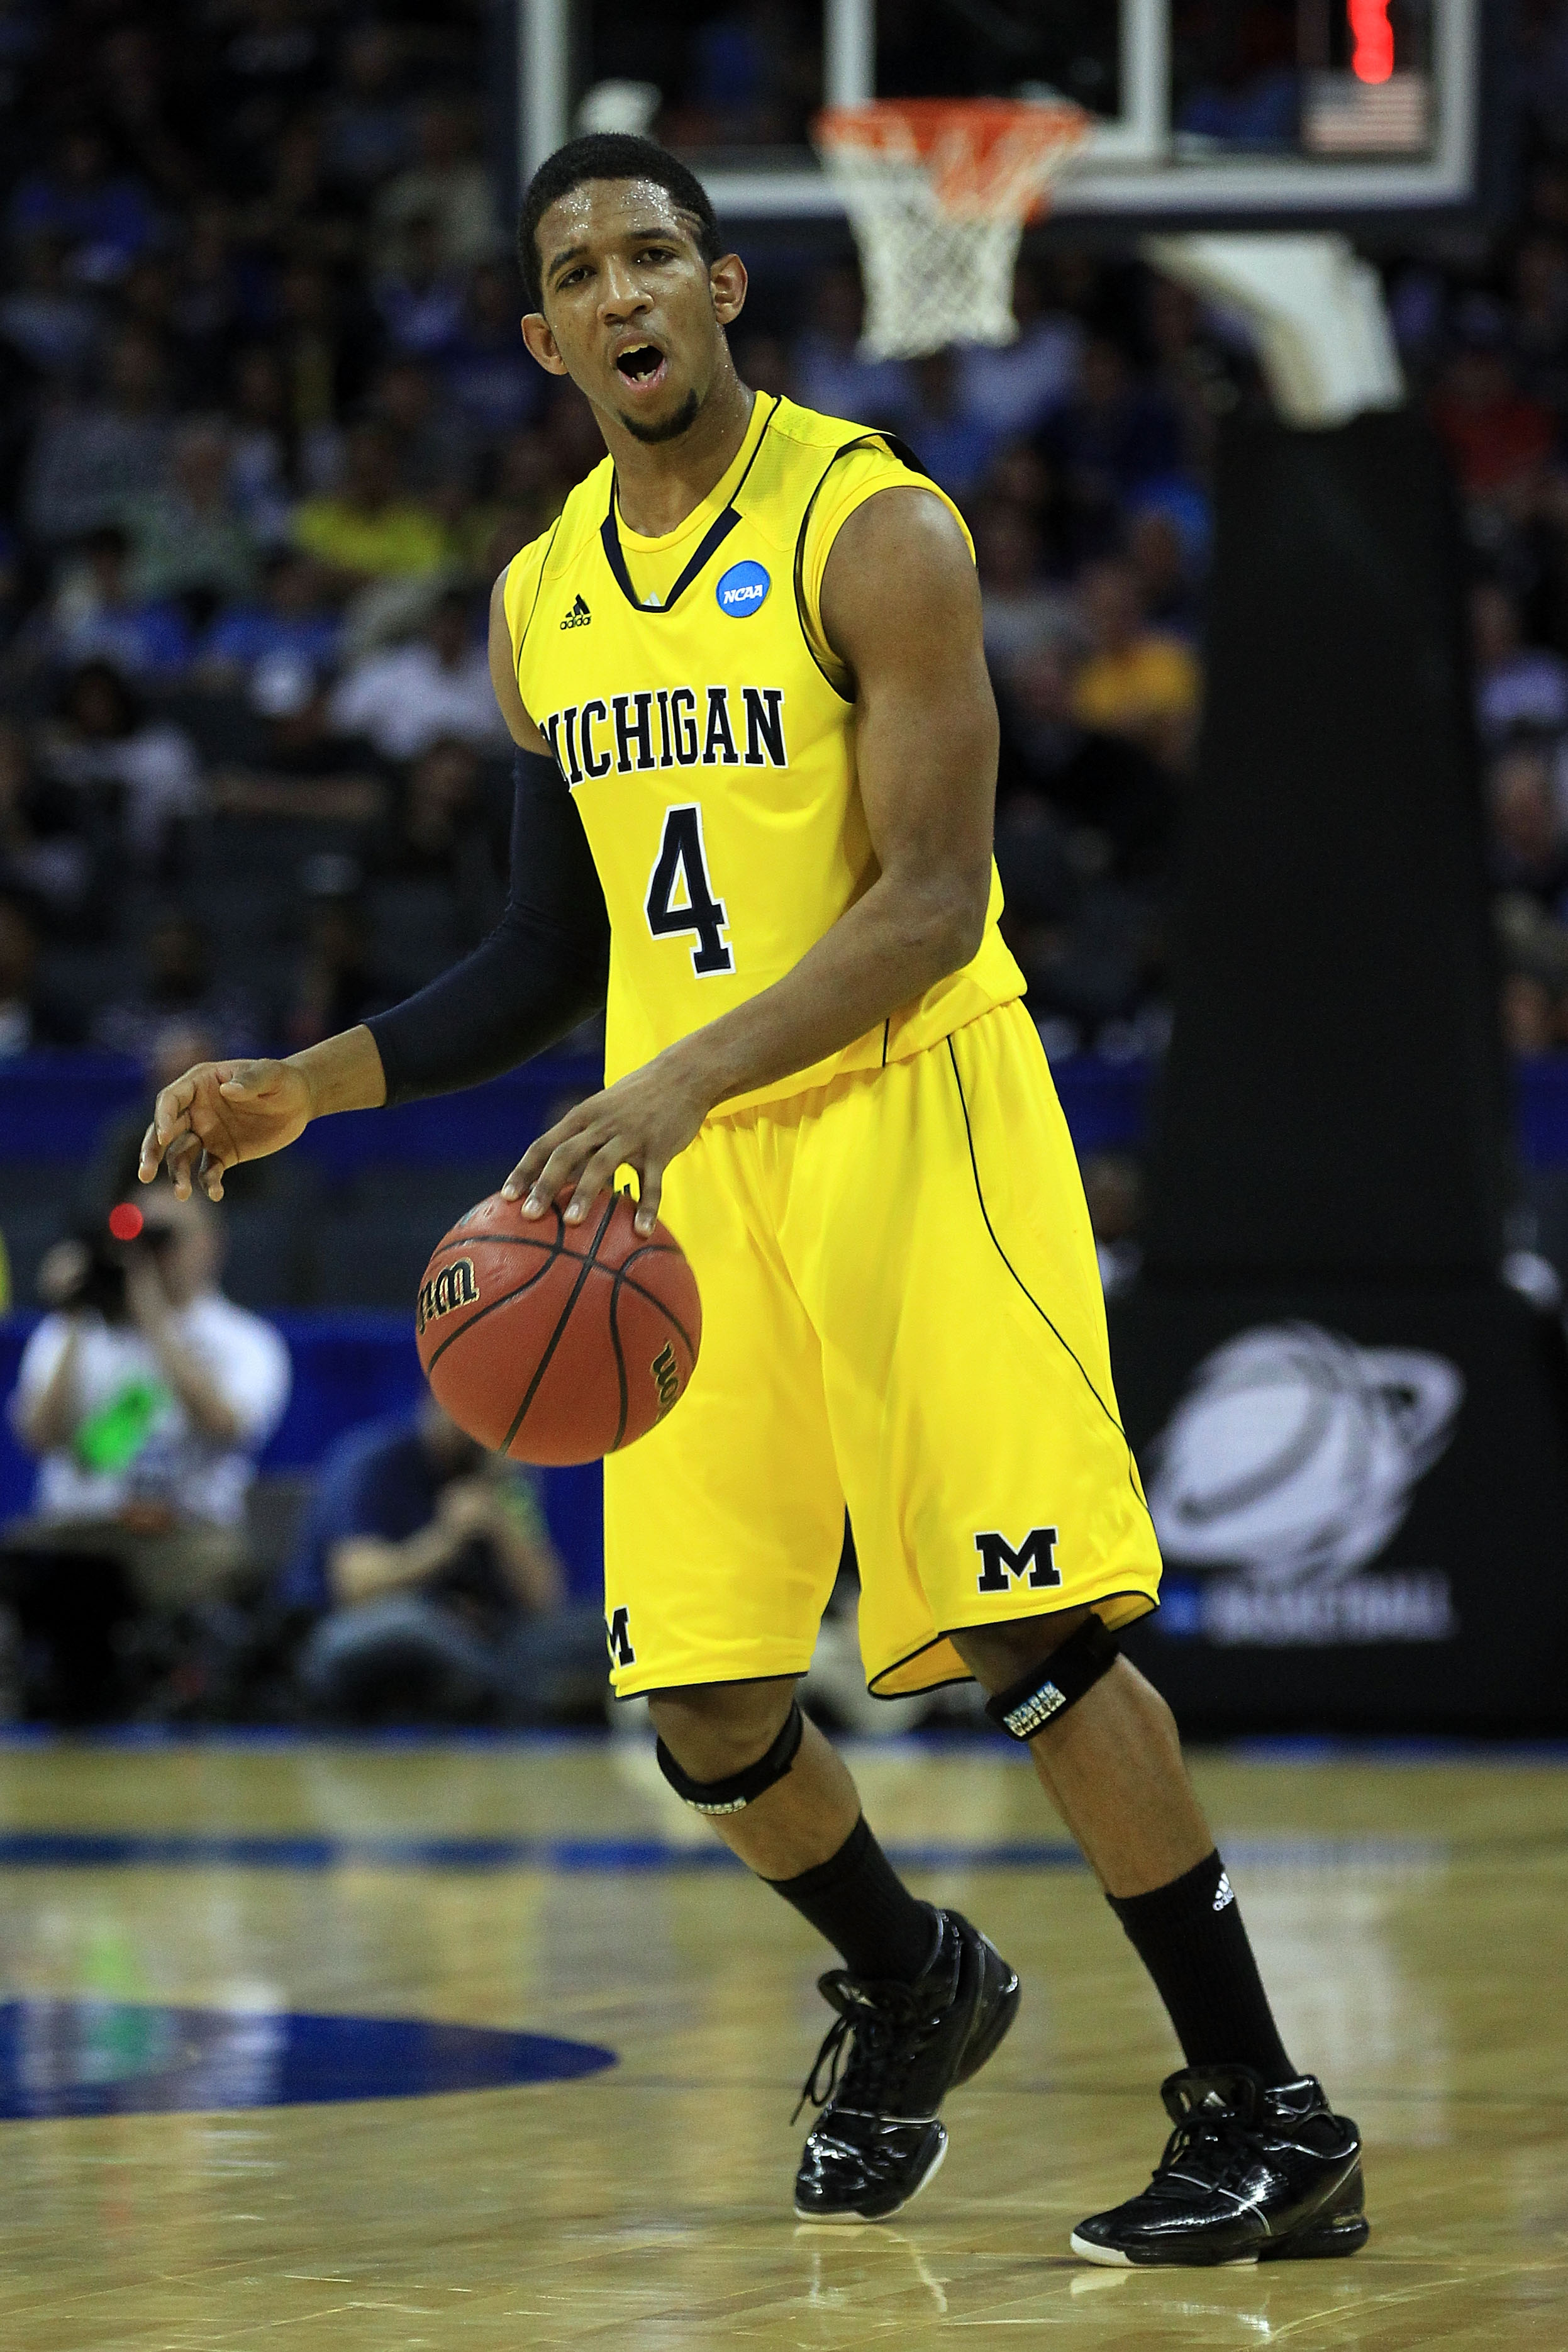 CHARLOTTE, NC - MARCH 20:  Darius Morris #4 of the Michigan Wolverines moves the ball while taking on the Duke Blue Devils during the third round of the 2011 NCAA men's basketball tournament at Time Warner Cable Arena on March 20, 2011 in Charlotte, North